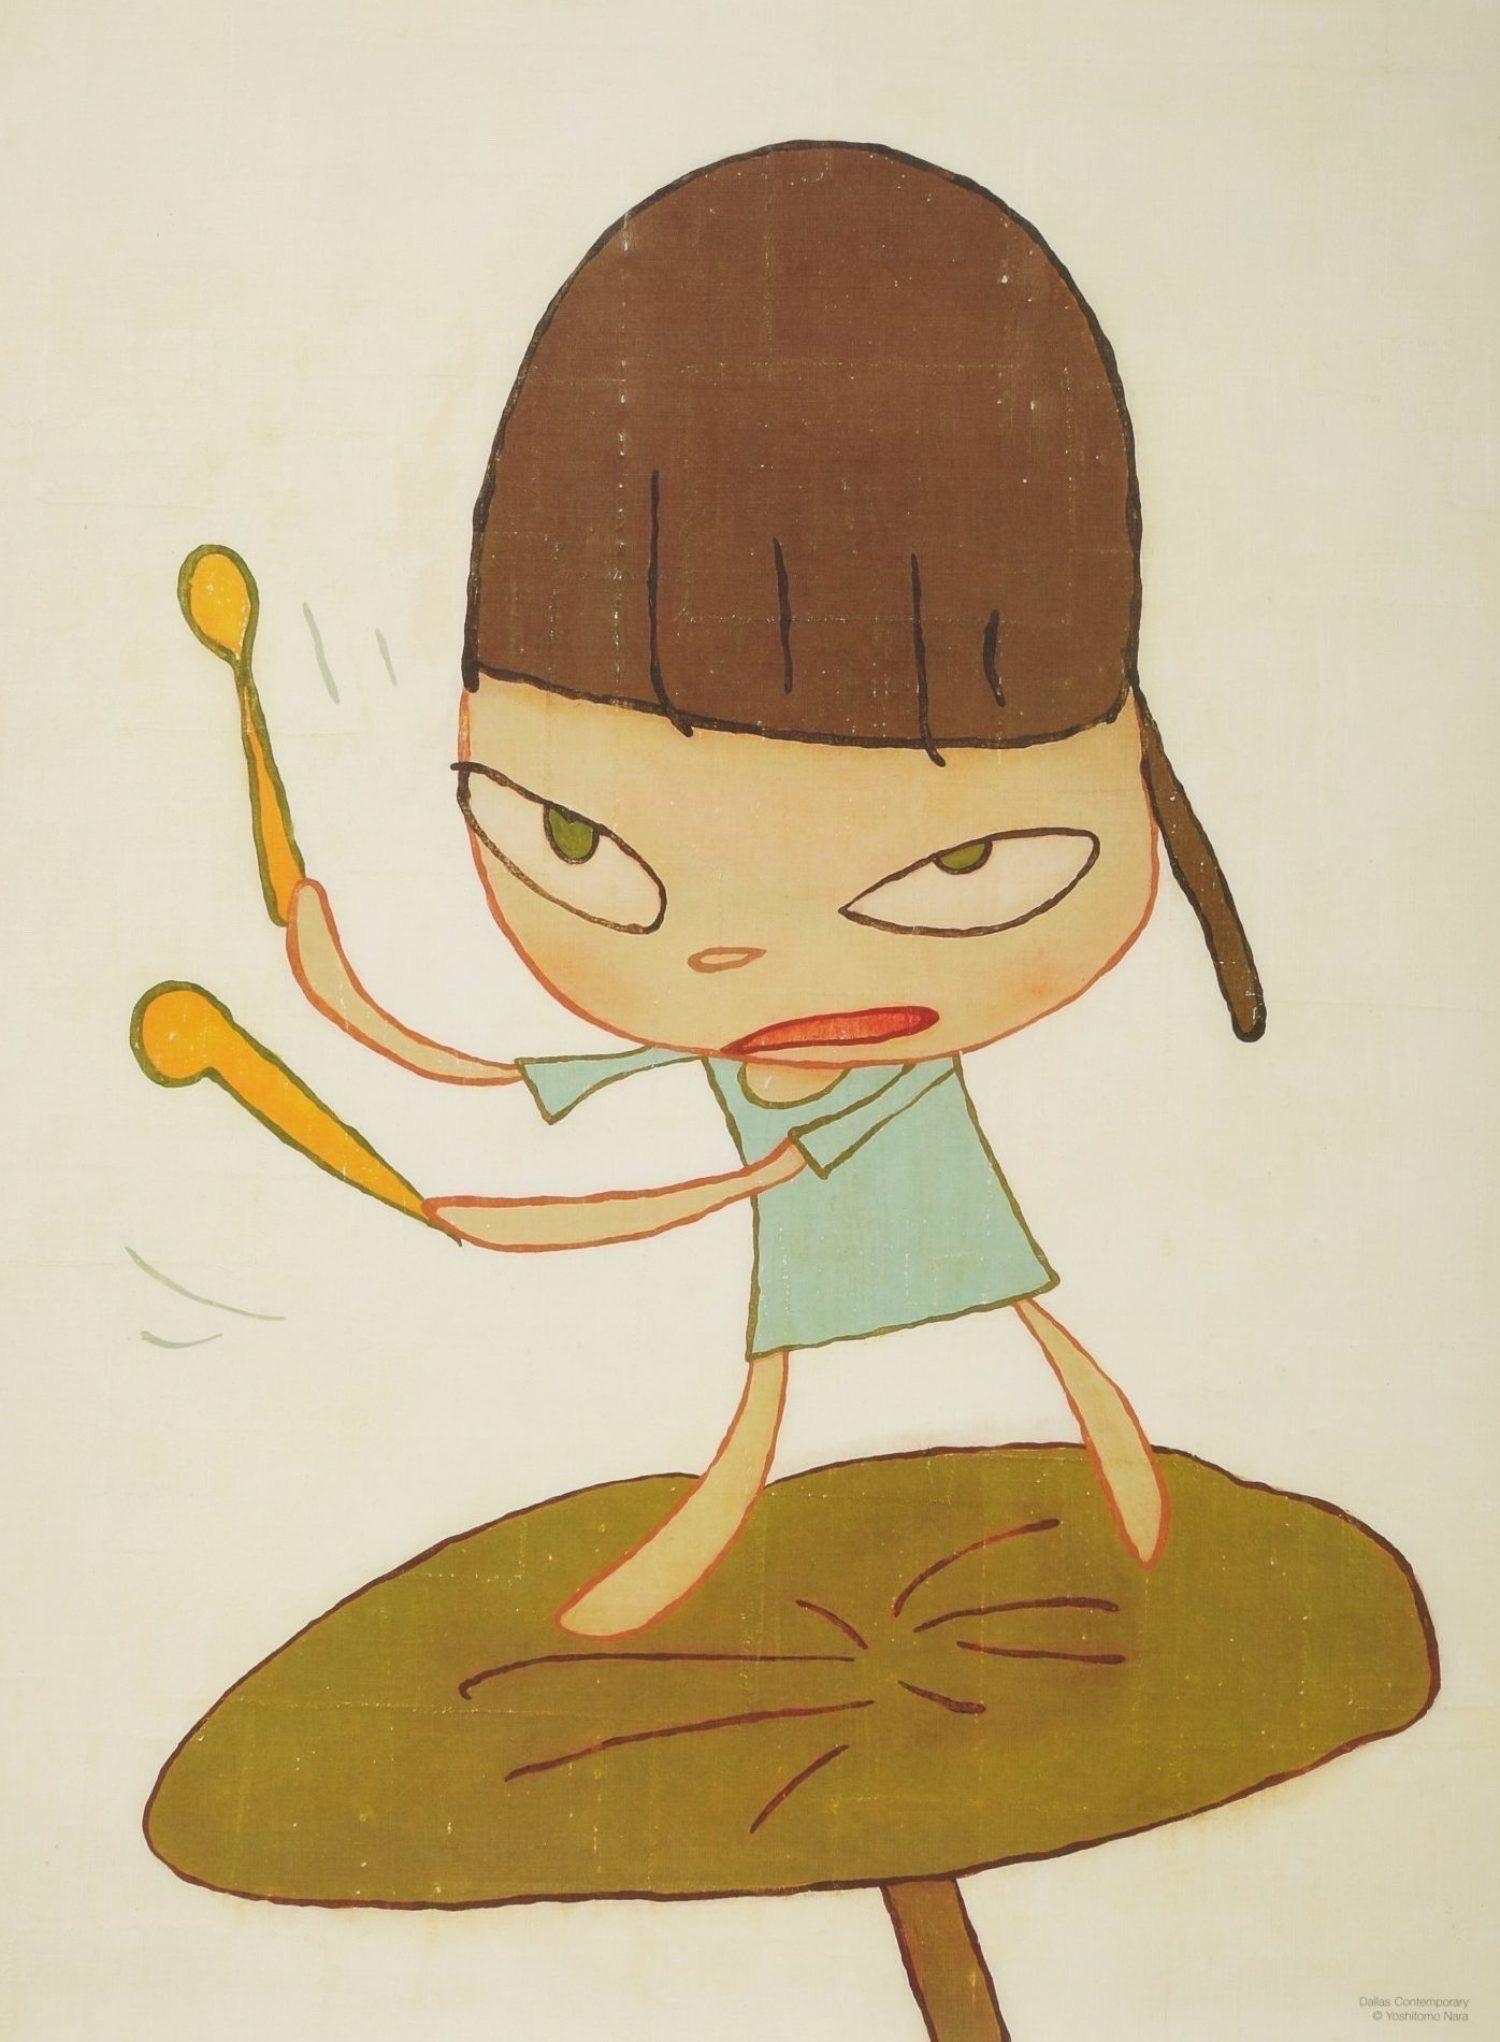 Yoshitomo Nara, Marching On A Butterbur Leaf, 2019

Offset lithograph in colours offset printed on 80 gsm archival quality paper
Edition of 1000

45.72 x 60.96cm (18 x 24 in) 


Yoshitomo Nara is among the most beloved Japanese artists of his